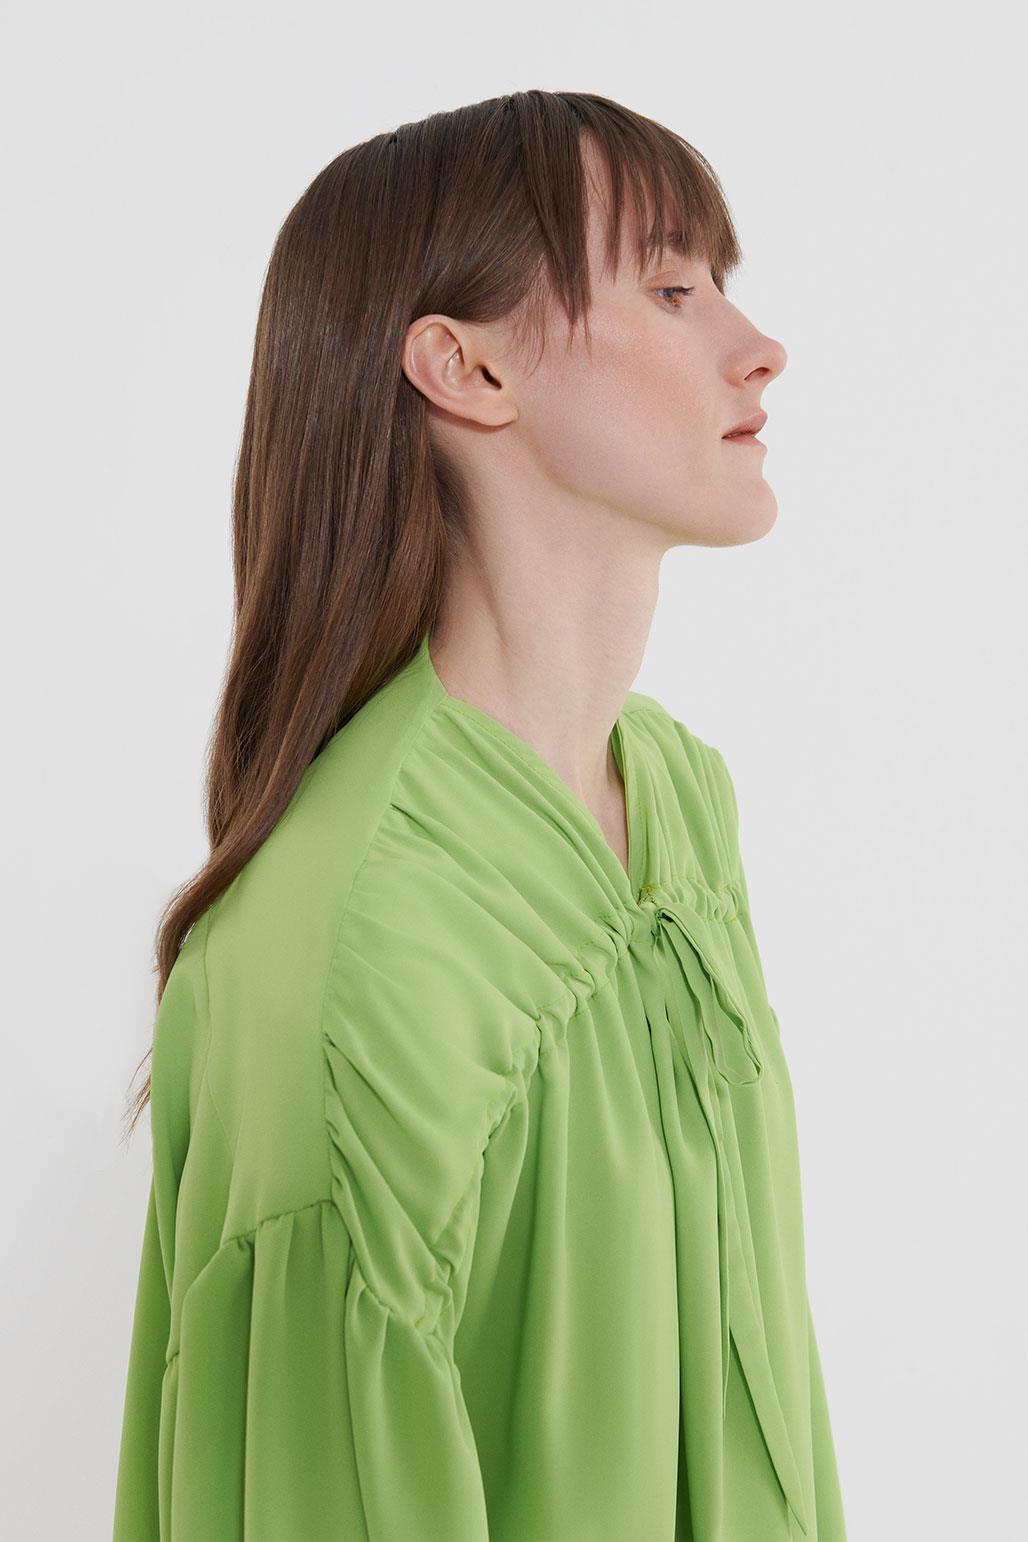 Front Tie Balloon Sleeve Shirt Lime